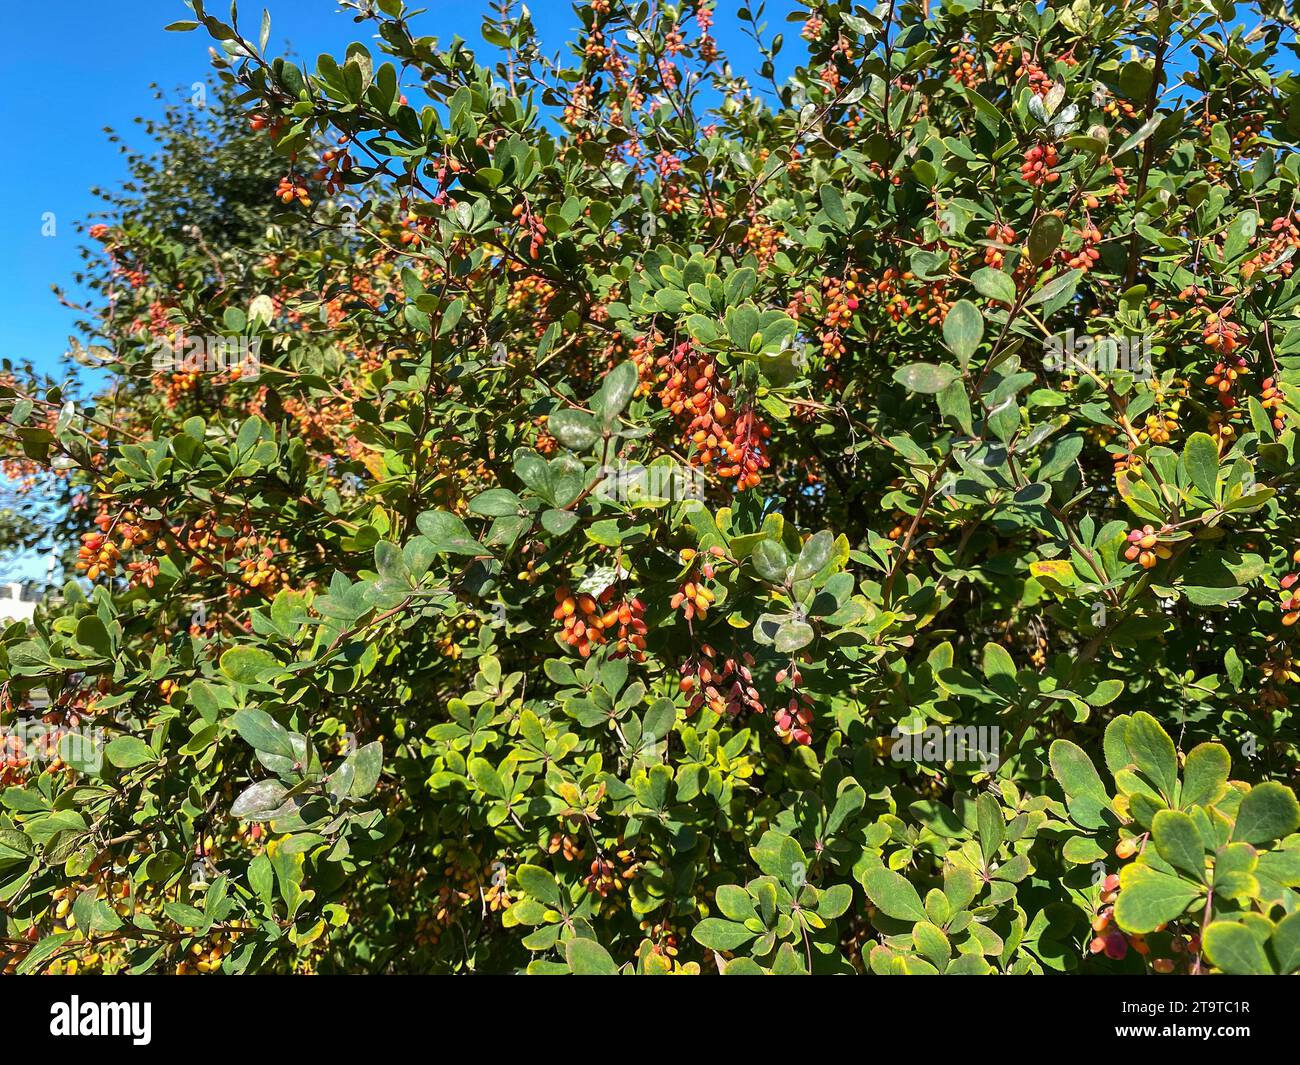 Berberis vulgaris with beautiful green foliage and bright red oval fruits, Evergreen shrub and ornamental plant, selective focus Stock Photo